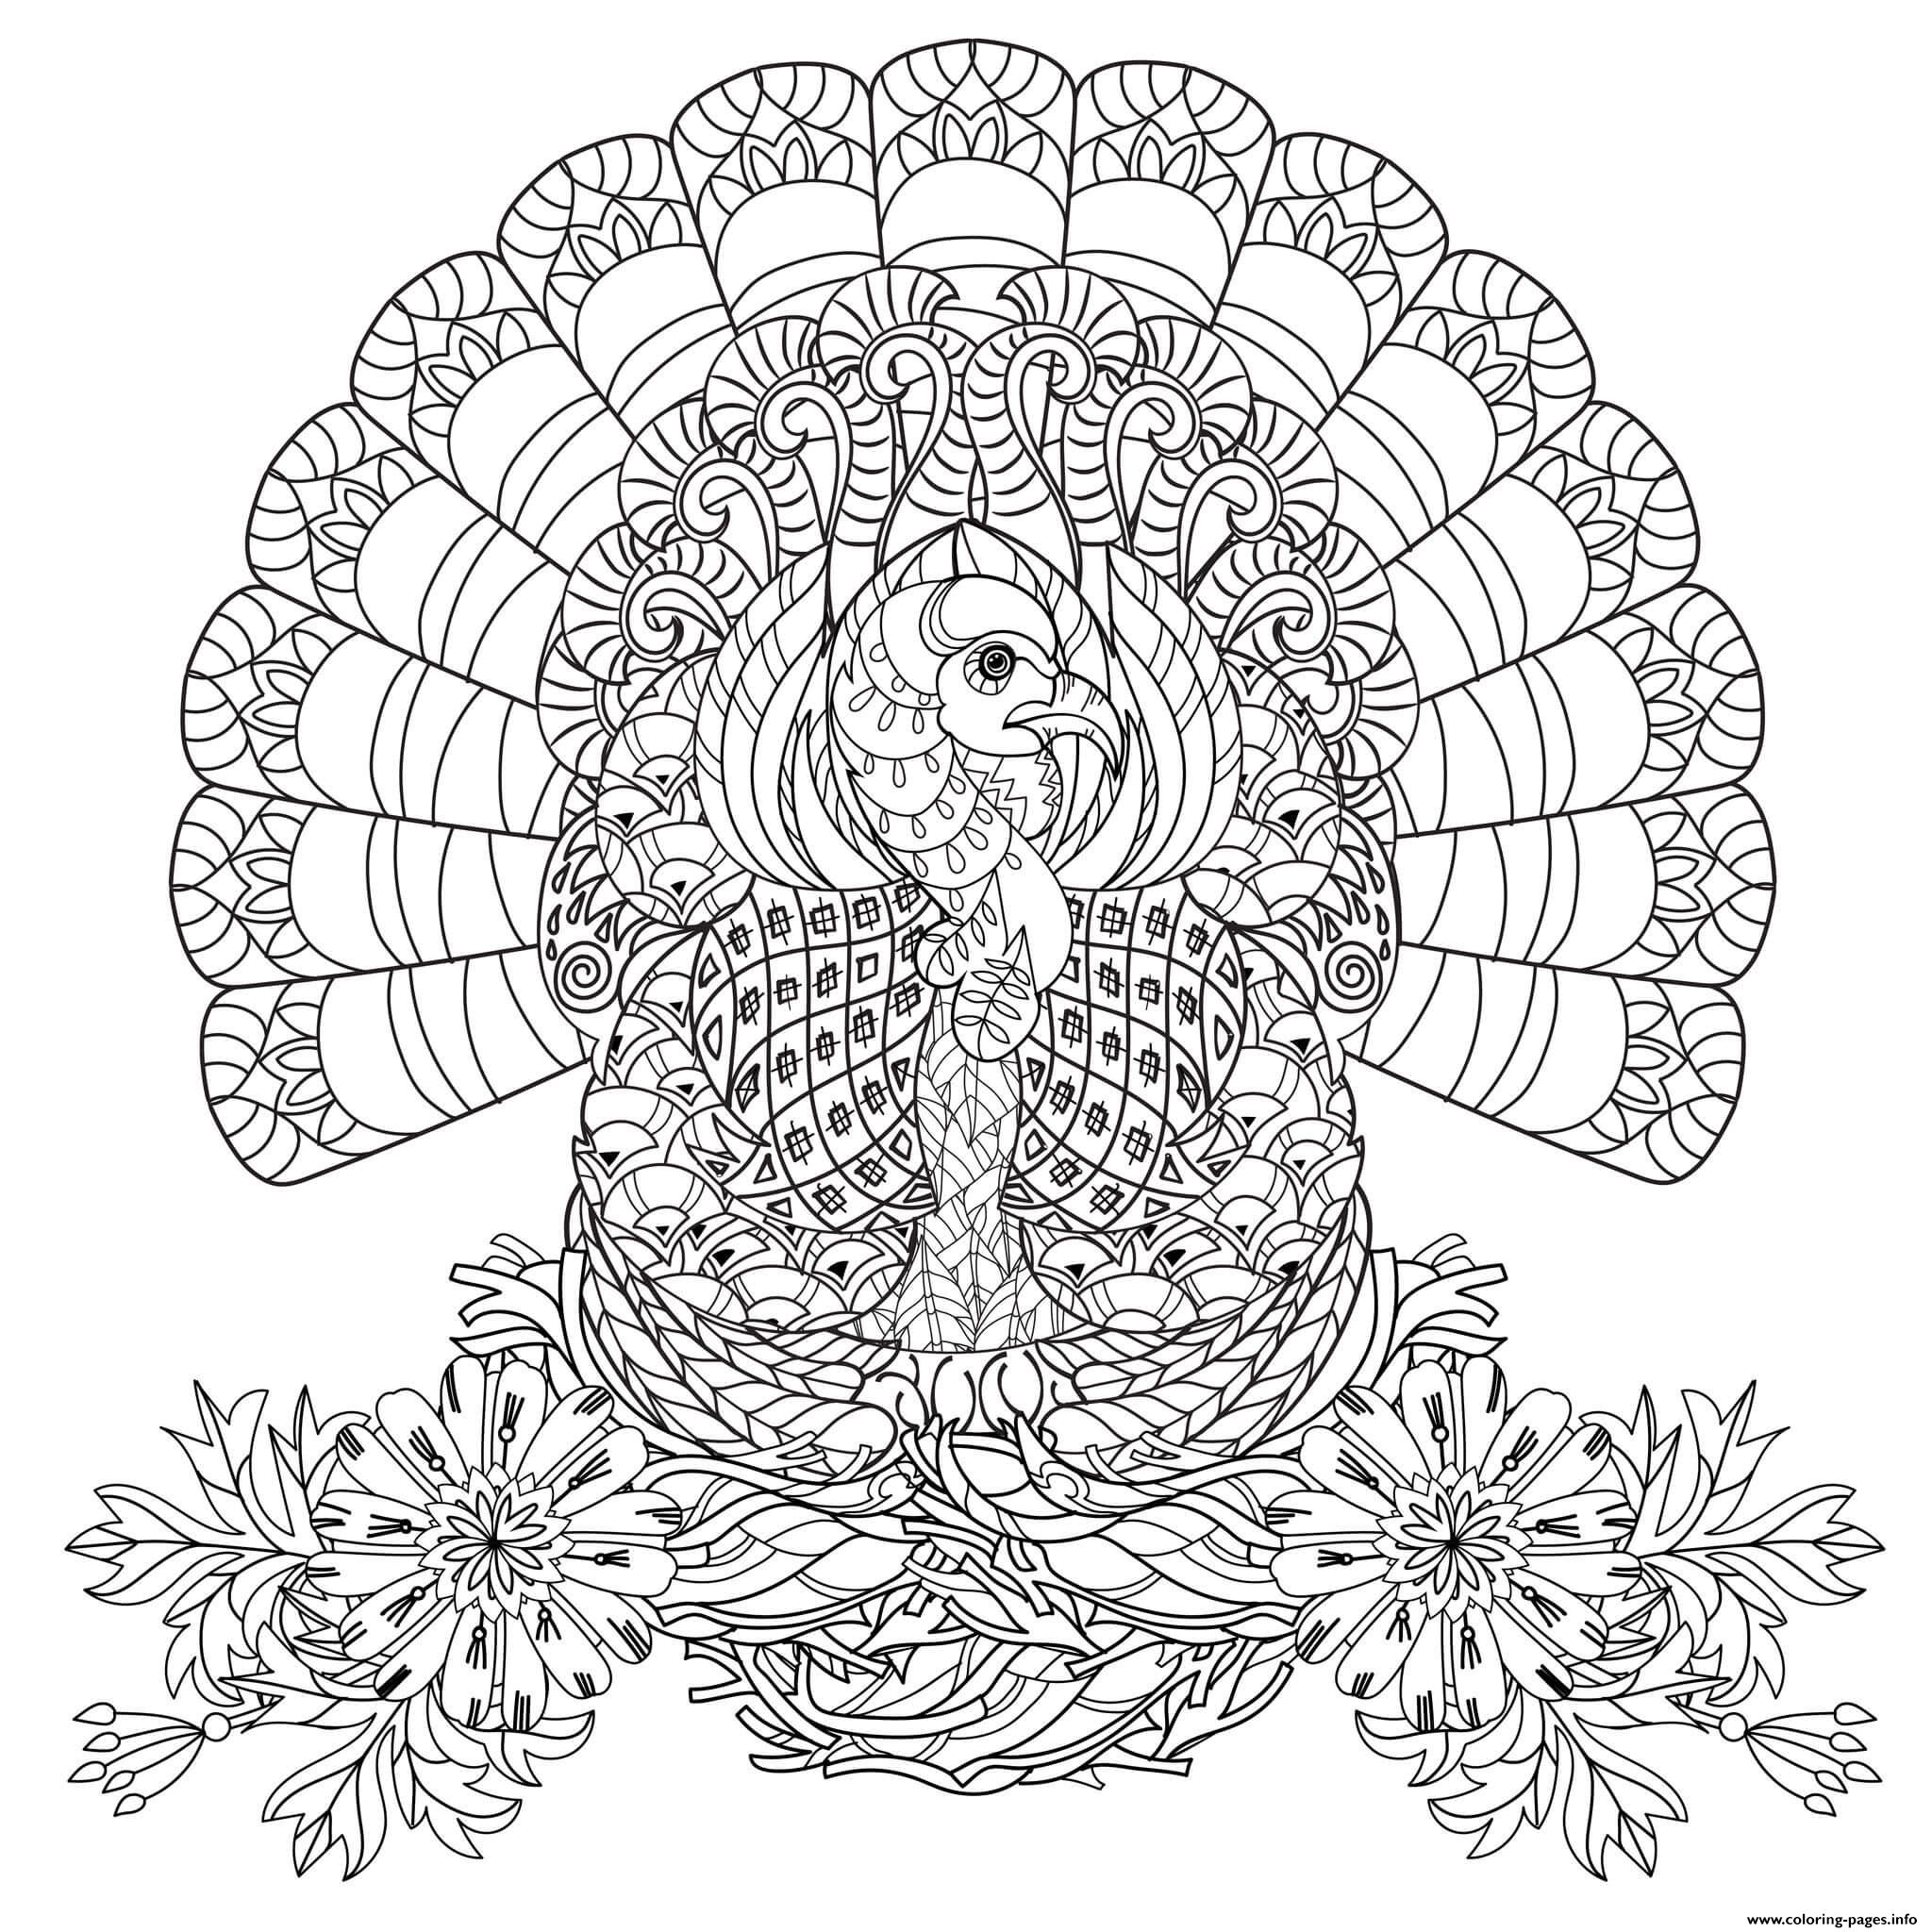 free-printable-thanksgiving-coloring-pages-for-adults-printable-templates